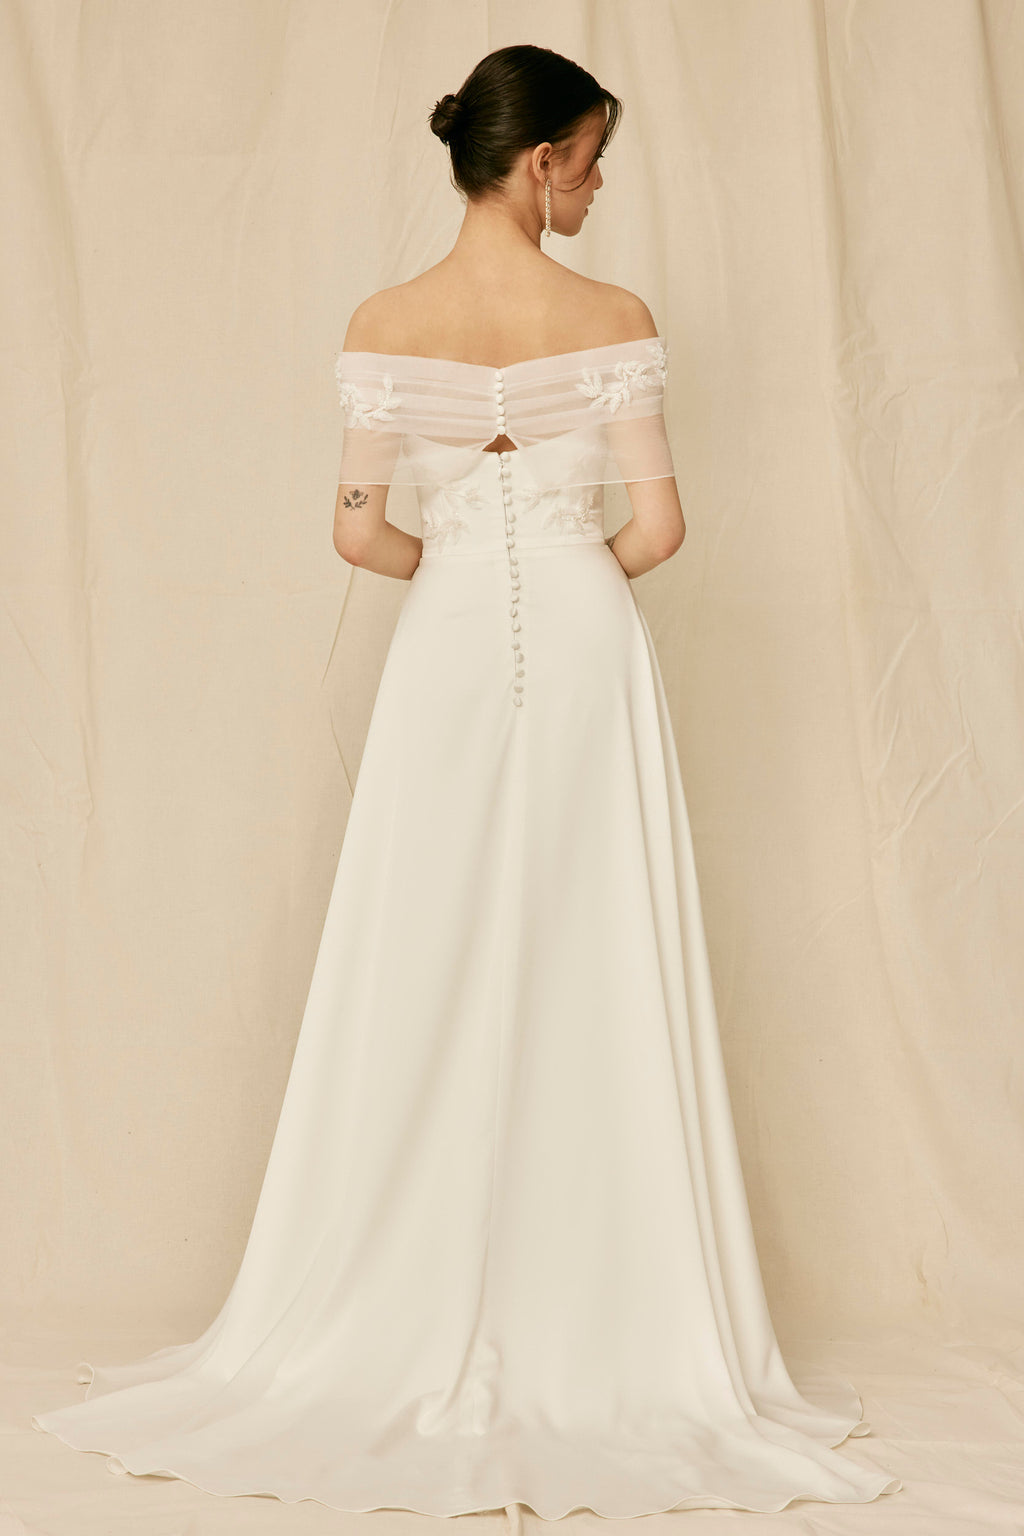 Wedding Dresses with Illusion Necklines: 27 of Our Favourite Styles -   